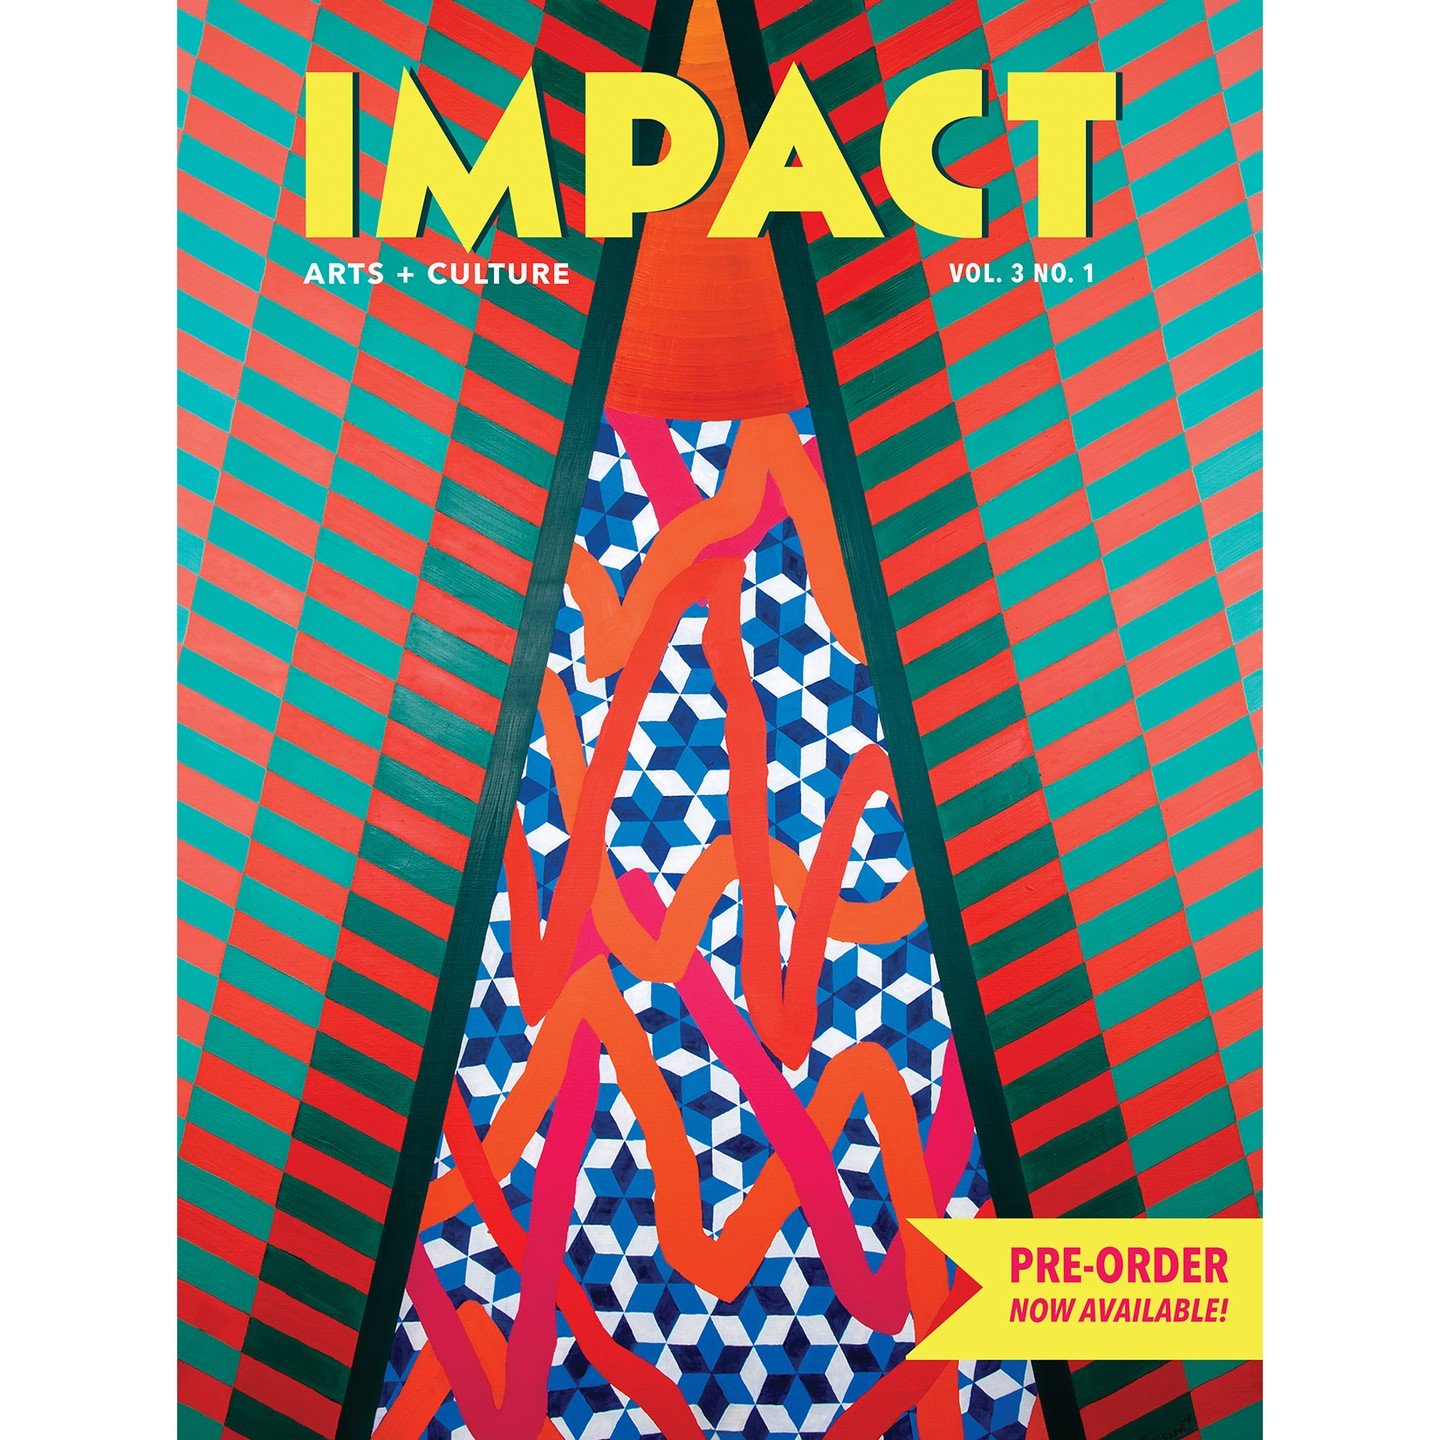 Volume 3 Number 1 of IMPACT Arts + Culture Magazine is now available for pre-order! Link in bio to get your copy today!

Join us for the Release Party on Friday, June 7th from 5 - 9PM during #FirstFridaysinStarland to celebrate the first issue of 202